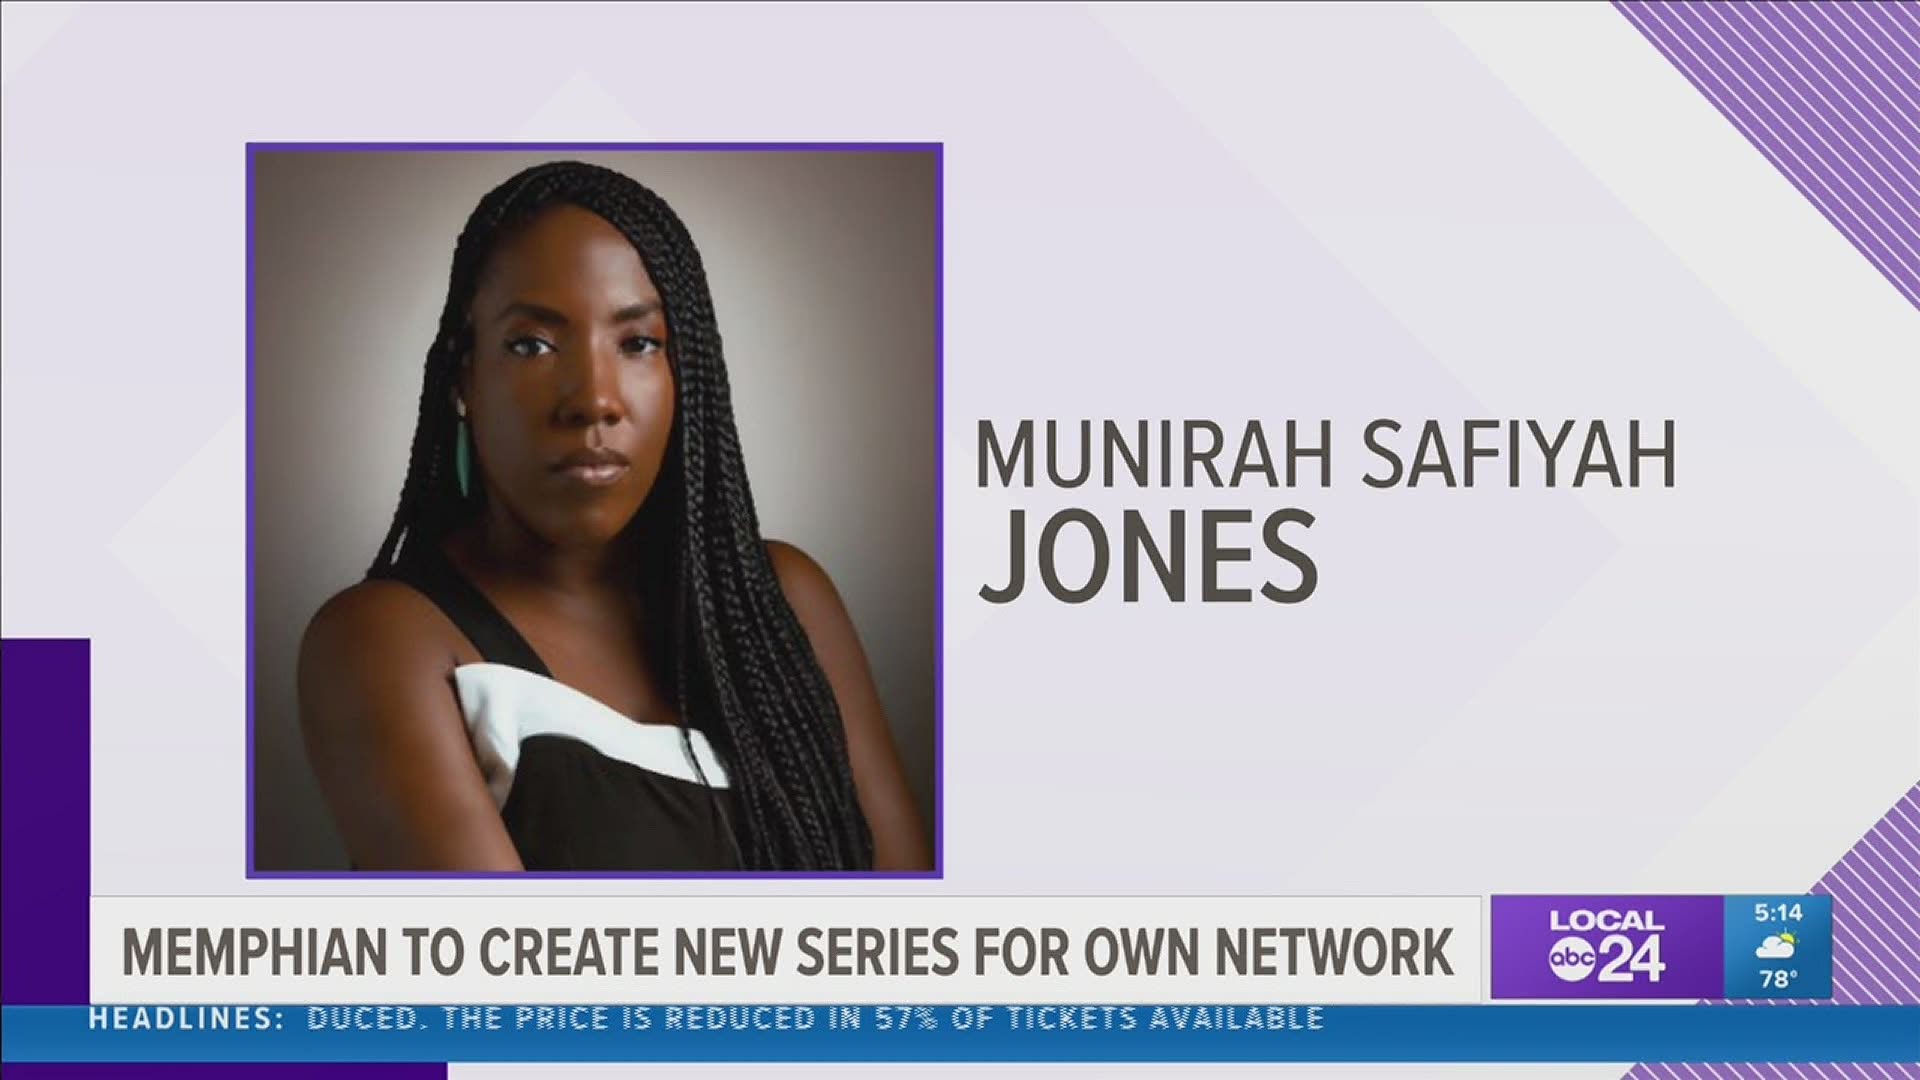 Munirah Safiyah Jones will develop the network's first animated series "The Mound," set in the historic black neighborhood during the 1980s.